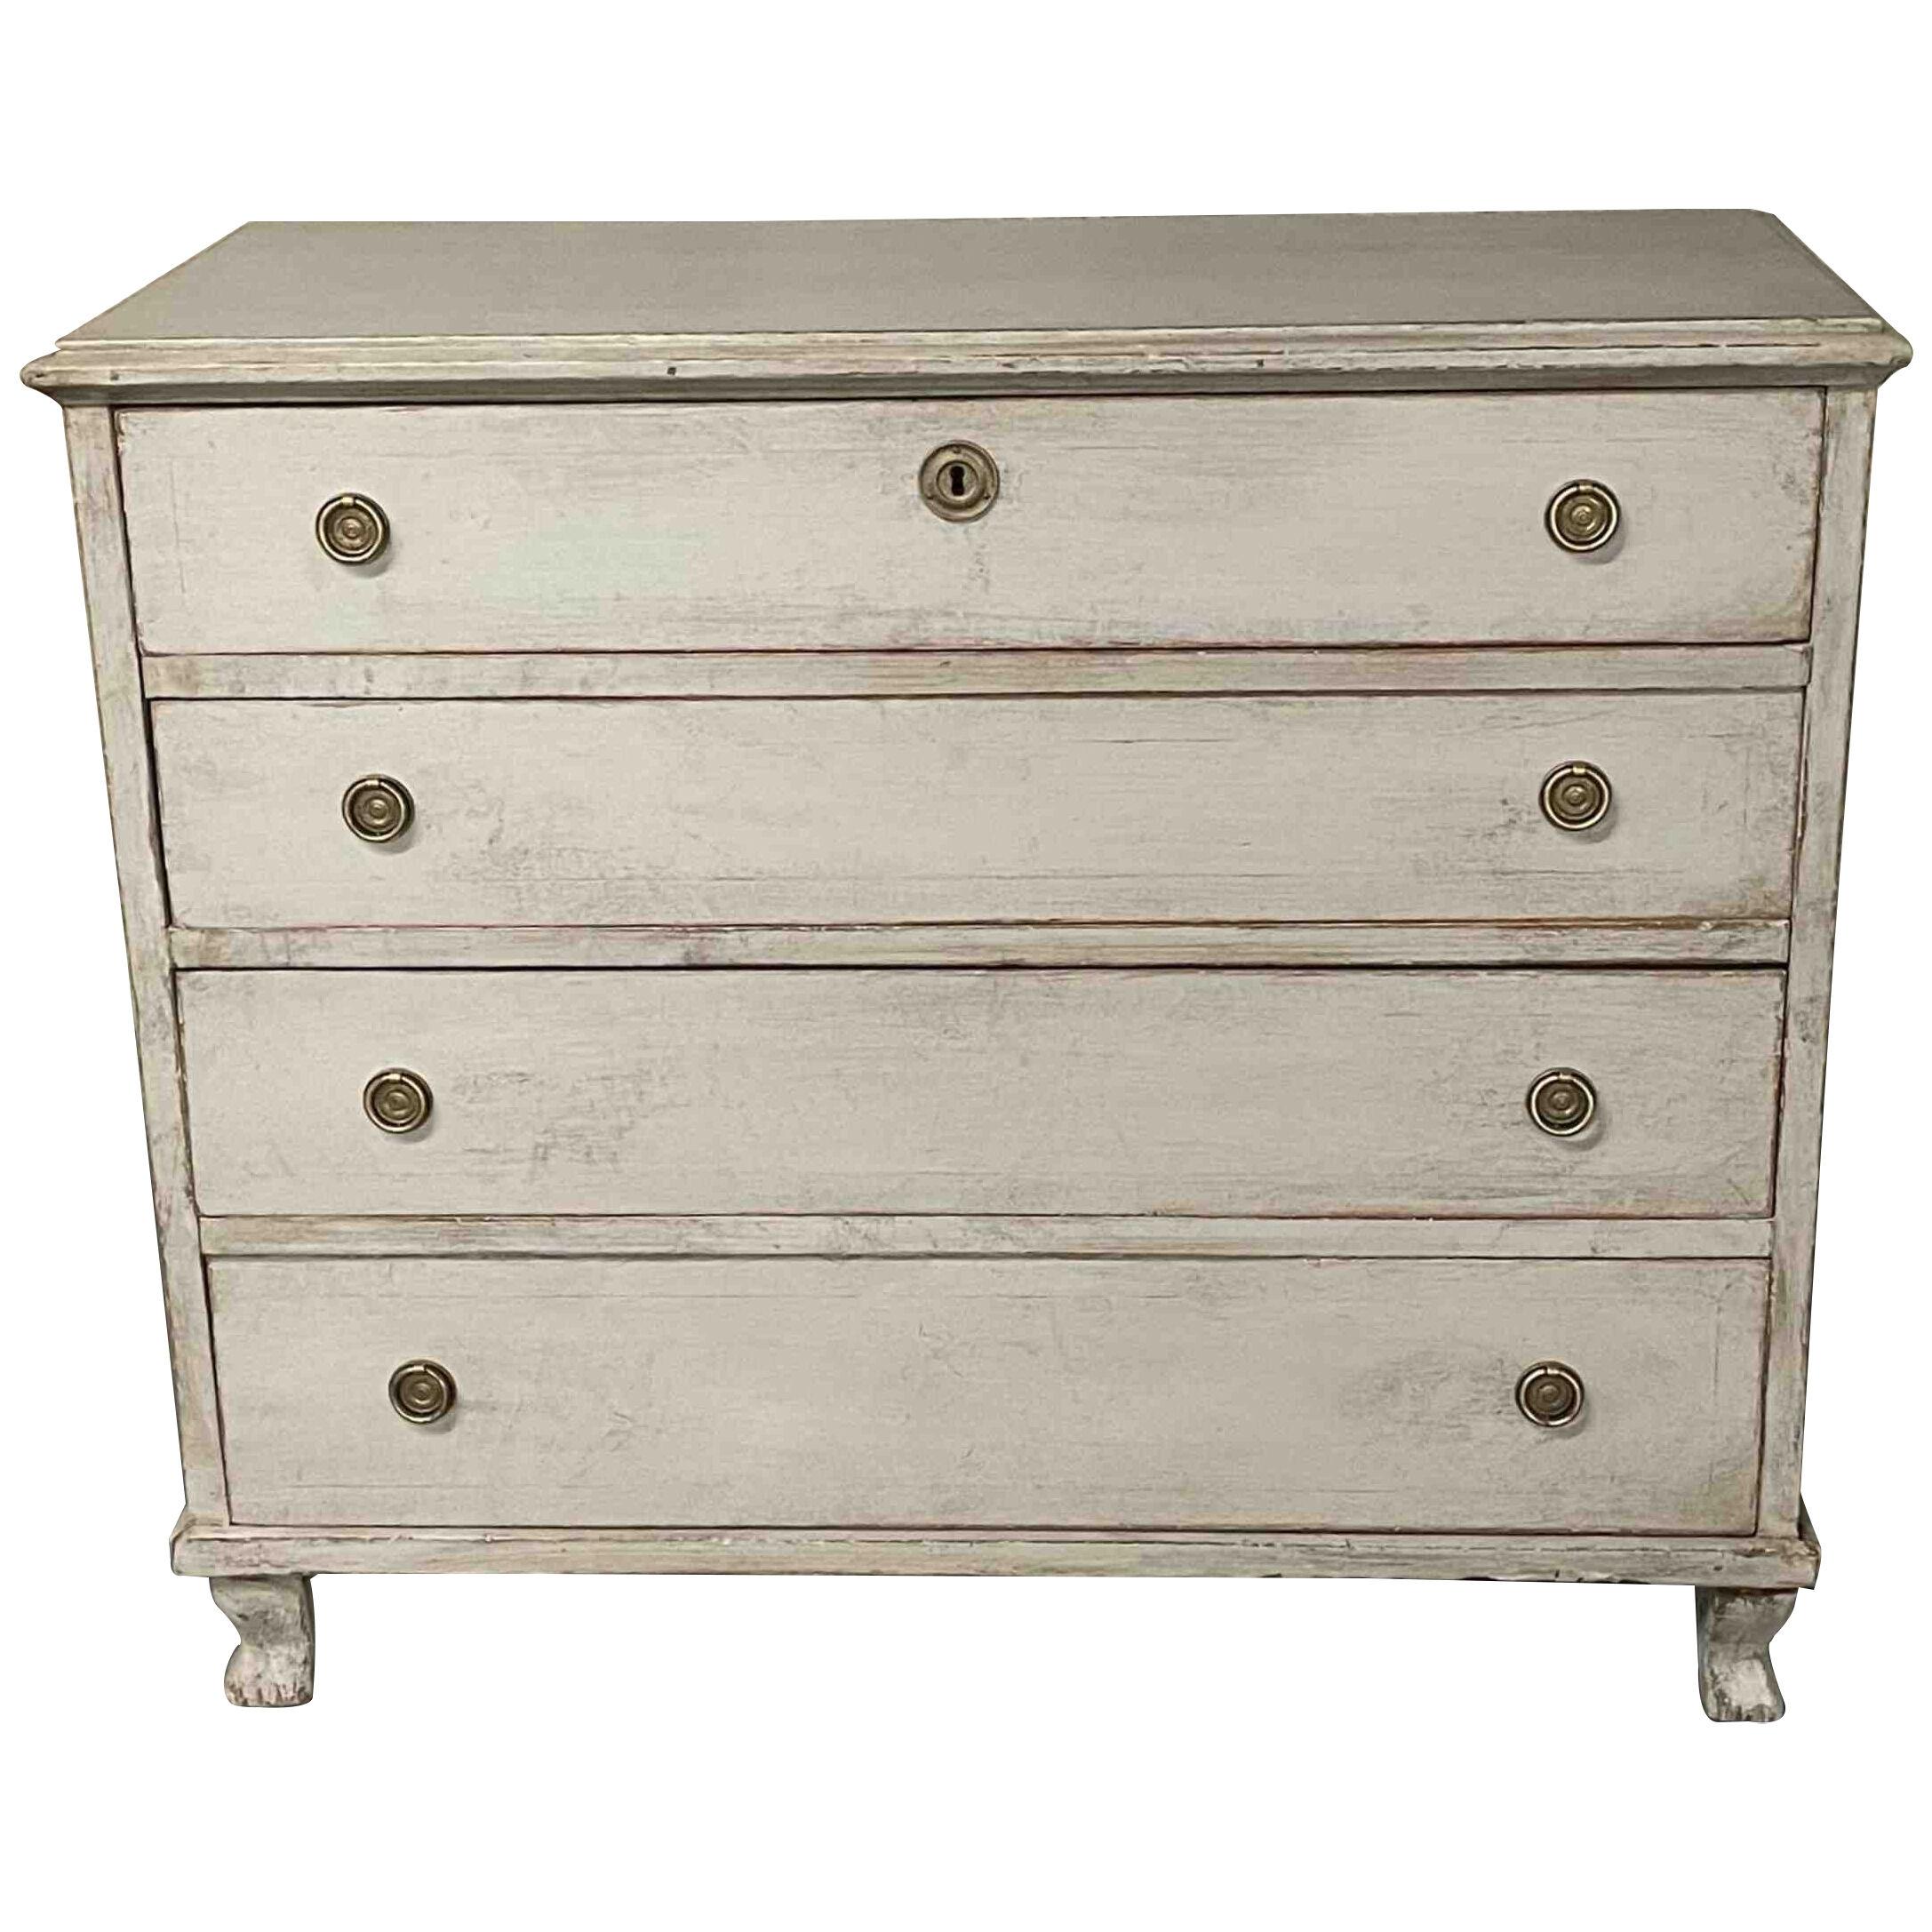 Early 20 Century Gustavian Four Drawer Chest, Painted, Having Graduating Drawers